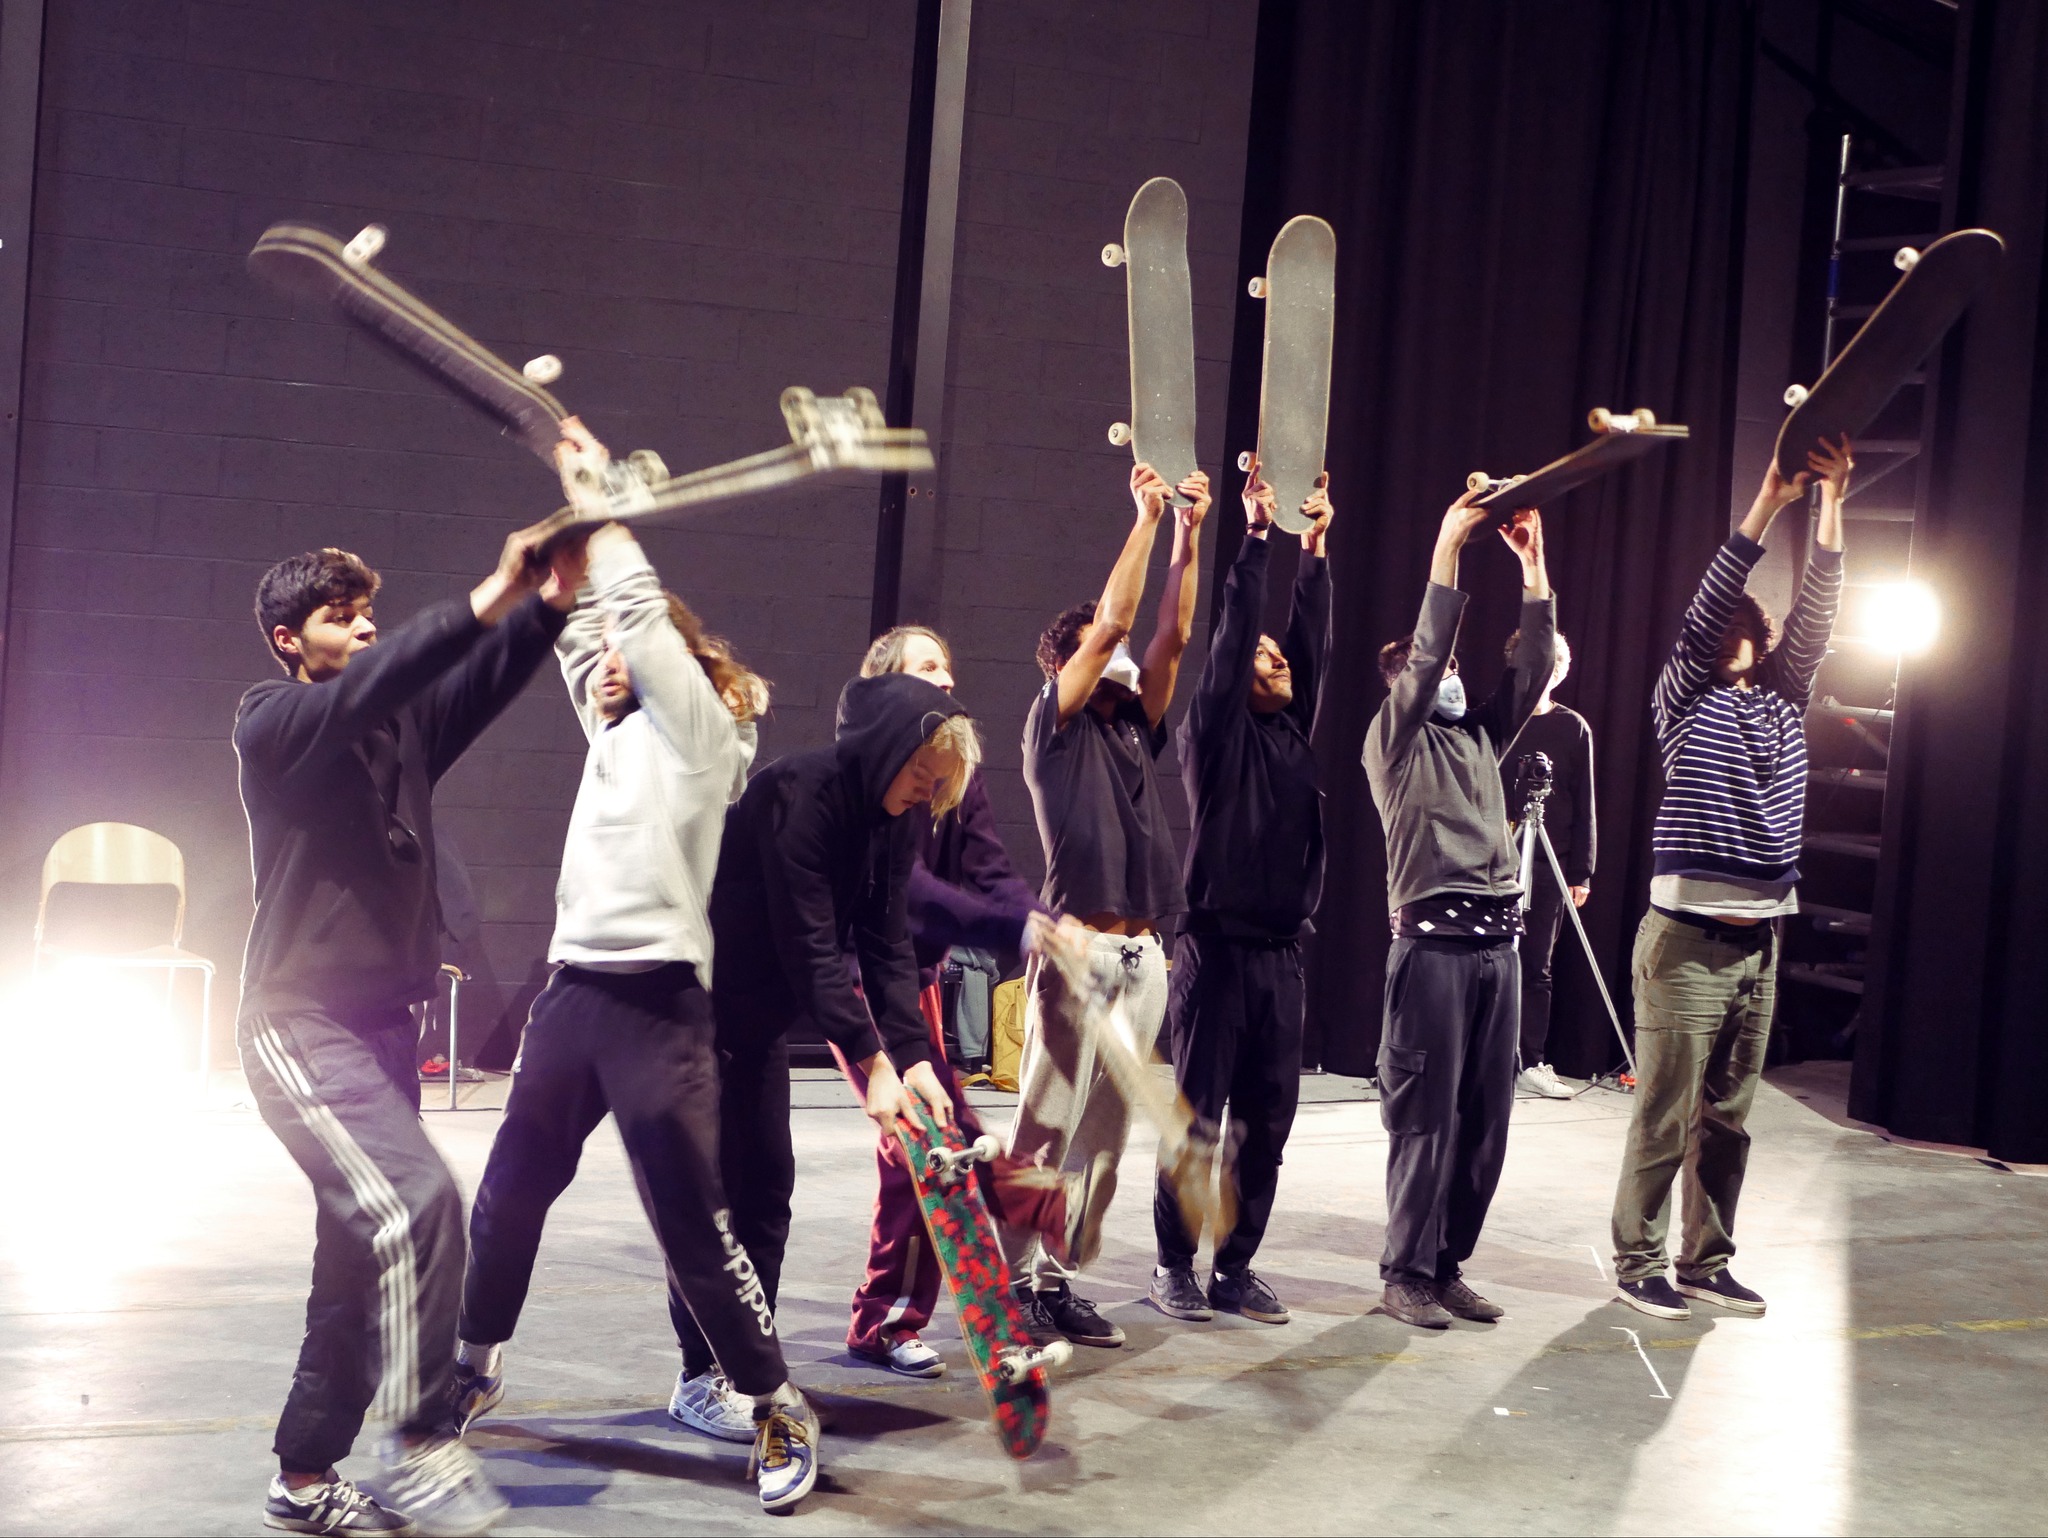 impro-de-groupe-skate-compagnie-mondenscene-labo-up-circus-and-performing-arts.jpg